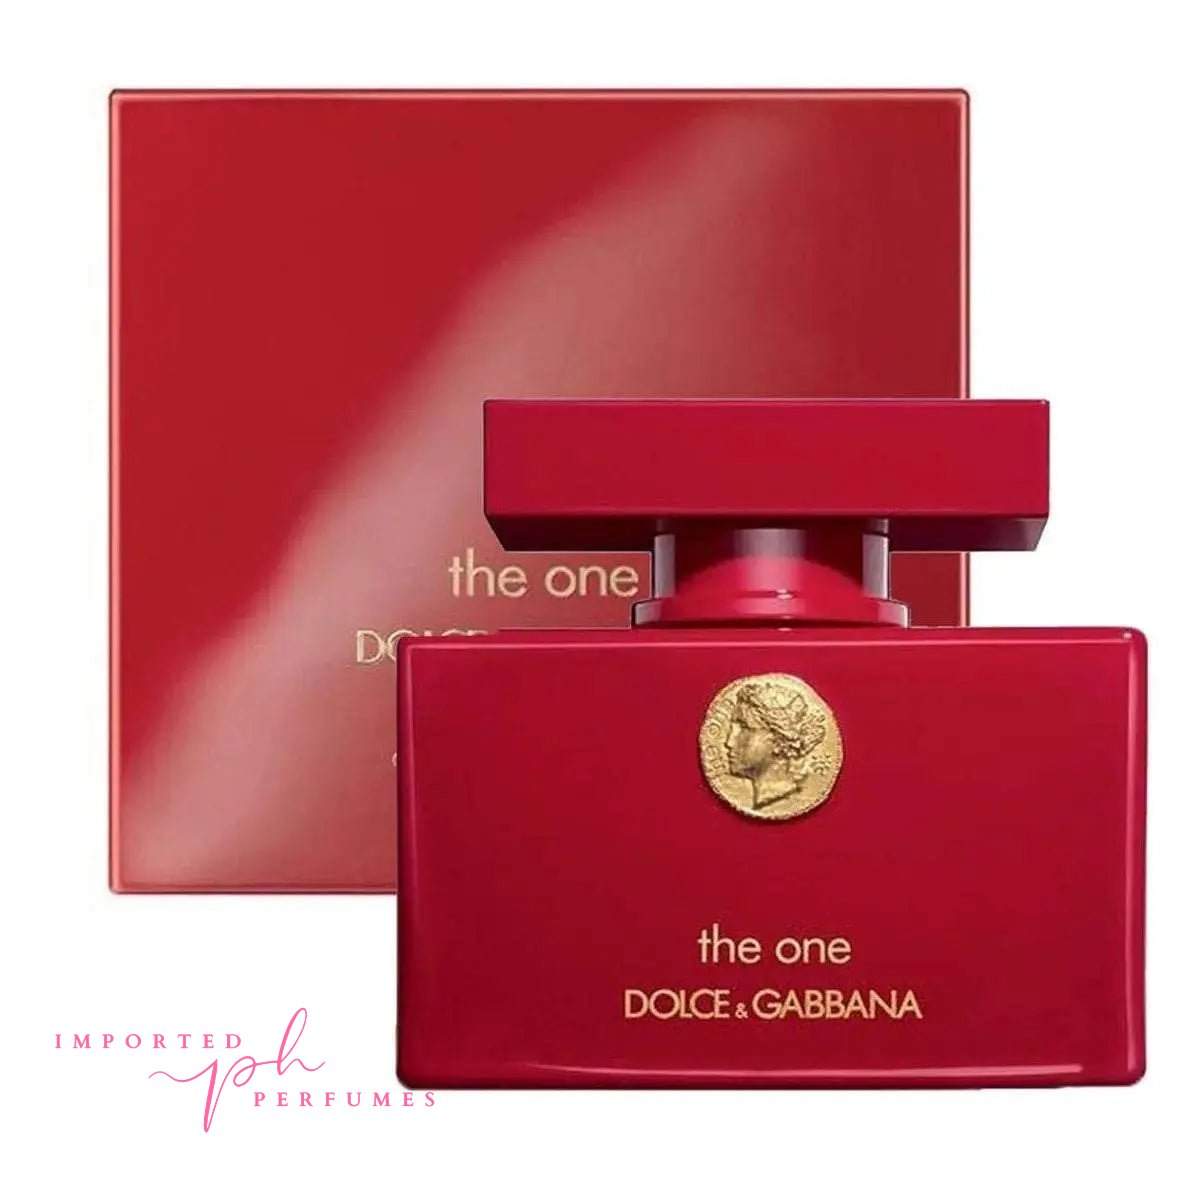 [TESTER] Dolce and Gabbana The One Collector’s Edition 75ml-Imported Perfumes Co-collector,Dolce,Dolce & Gabbana,TESTER,women